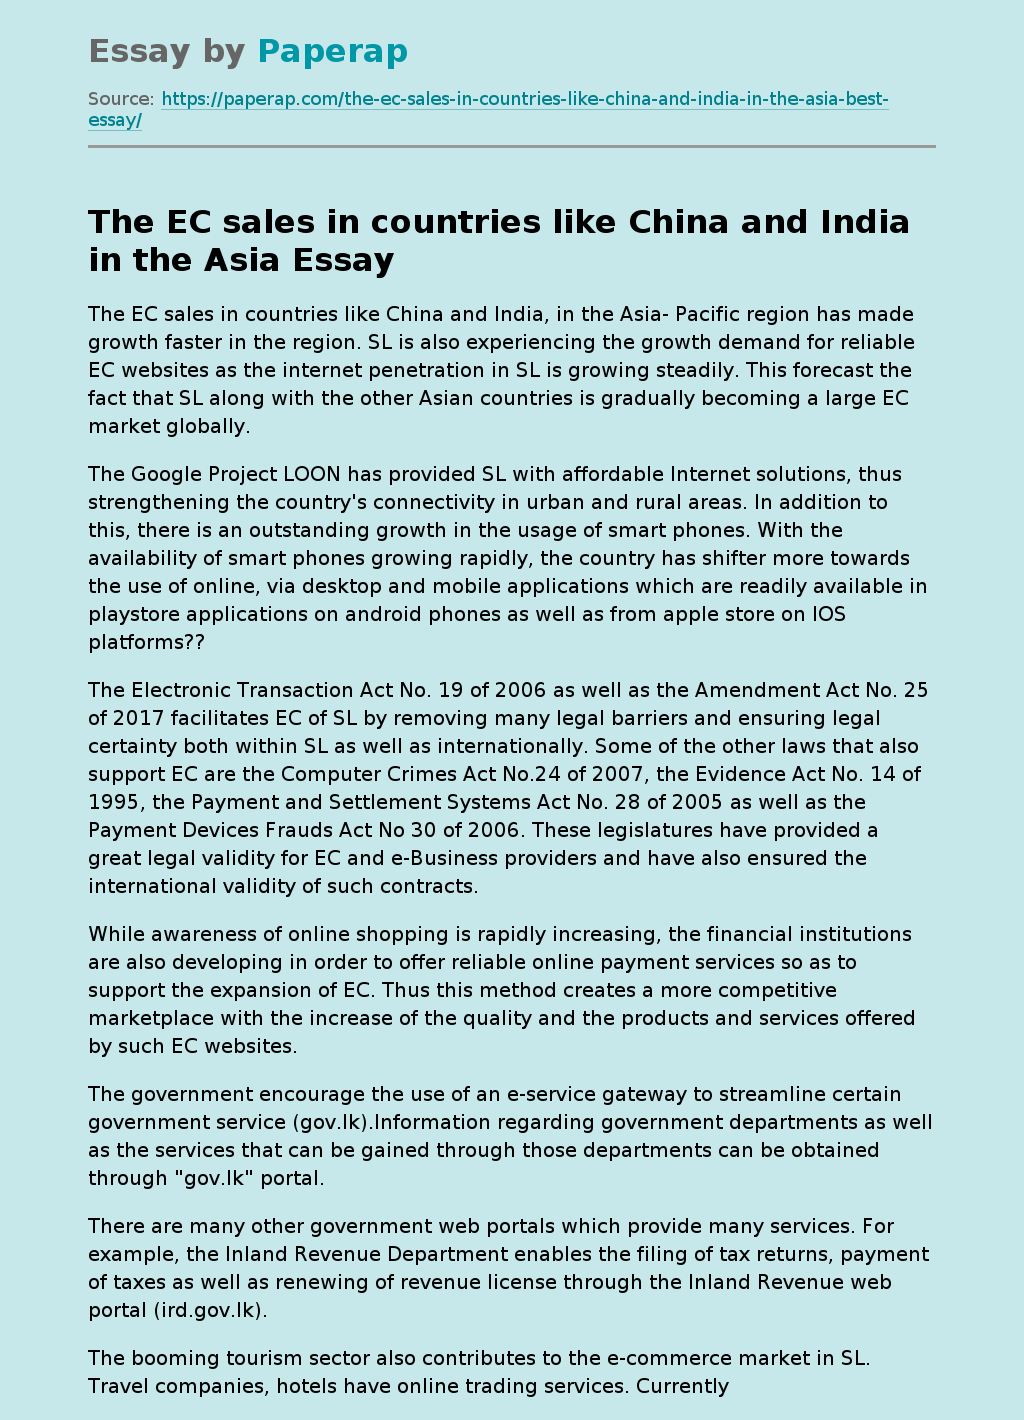 The EC sales in countries like China and India in the Asia